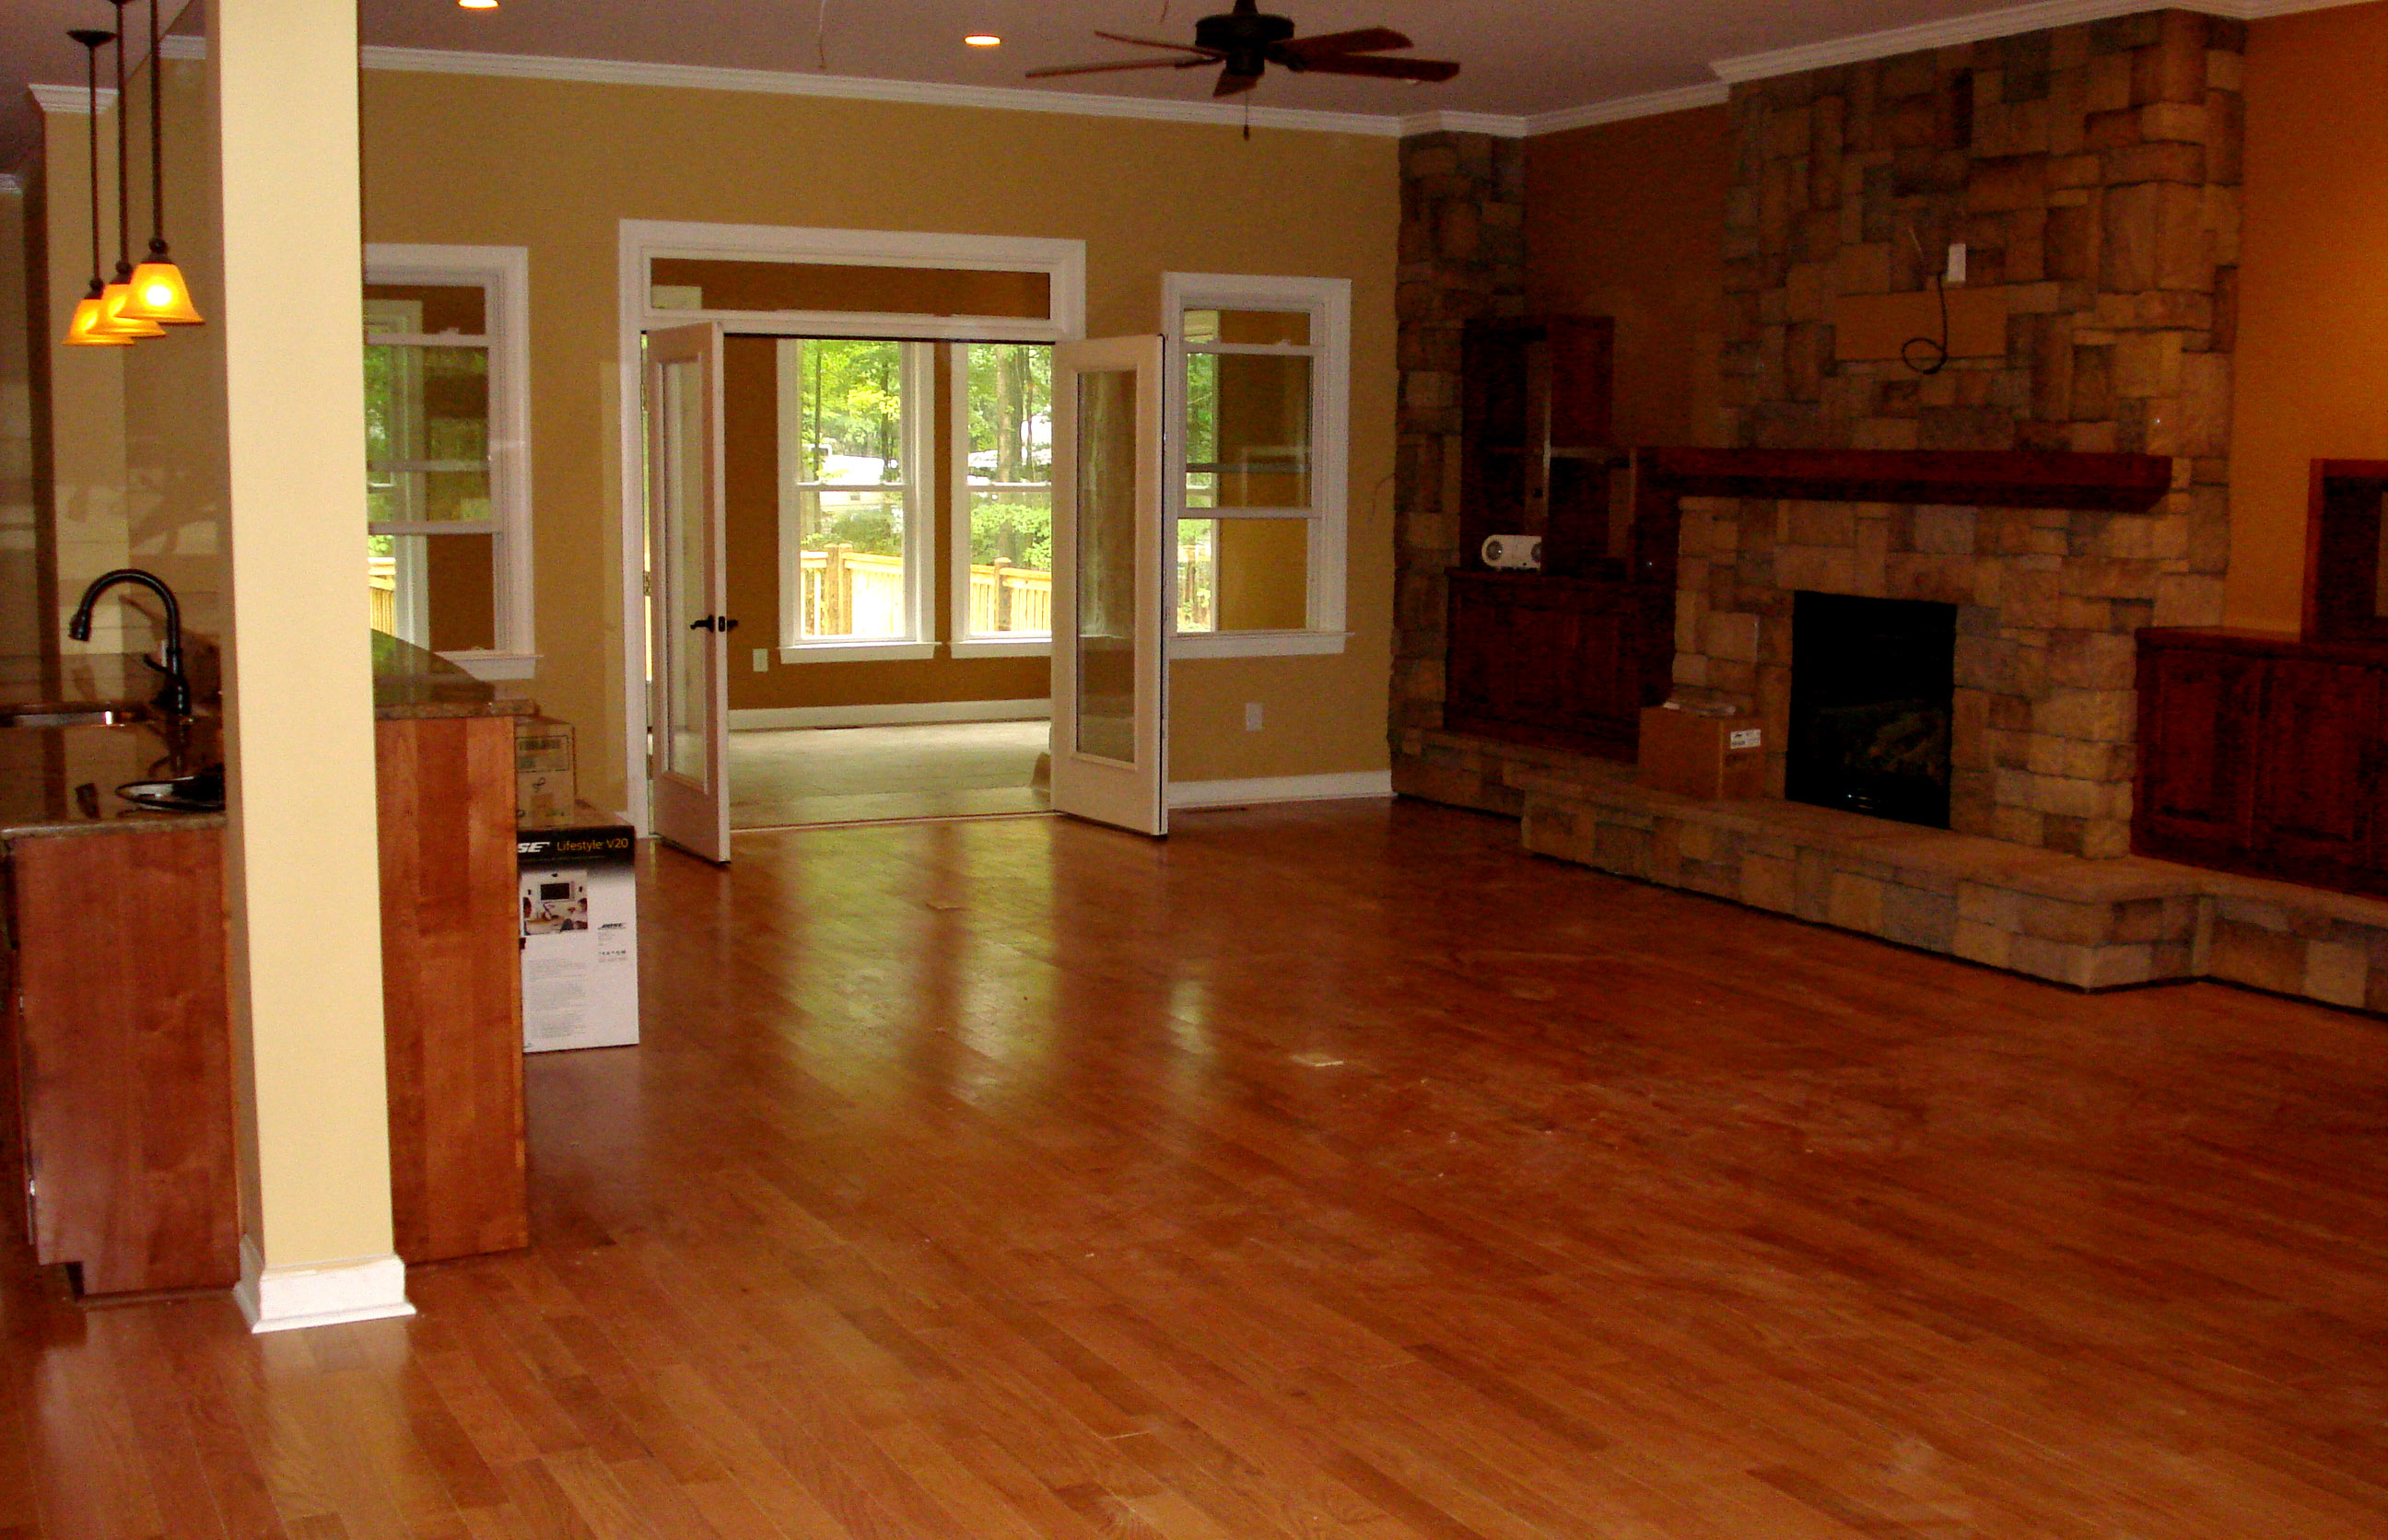 Open Floor Red Stunning Open Floor Decoration Style Red Oak Flooring With Glossy Design In Traditional Home Interior House Designs  Traditional Red Oak Flooring In Many Rooms 